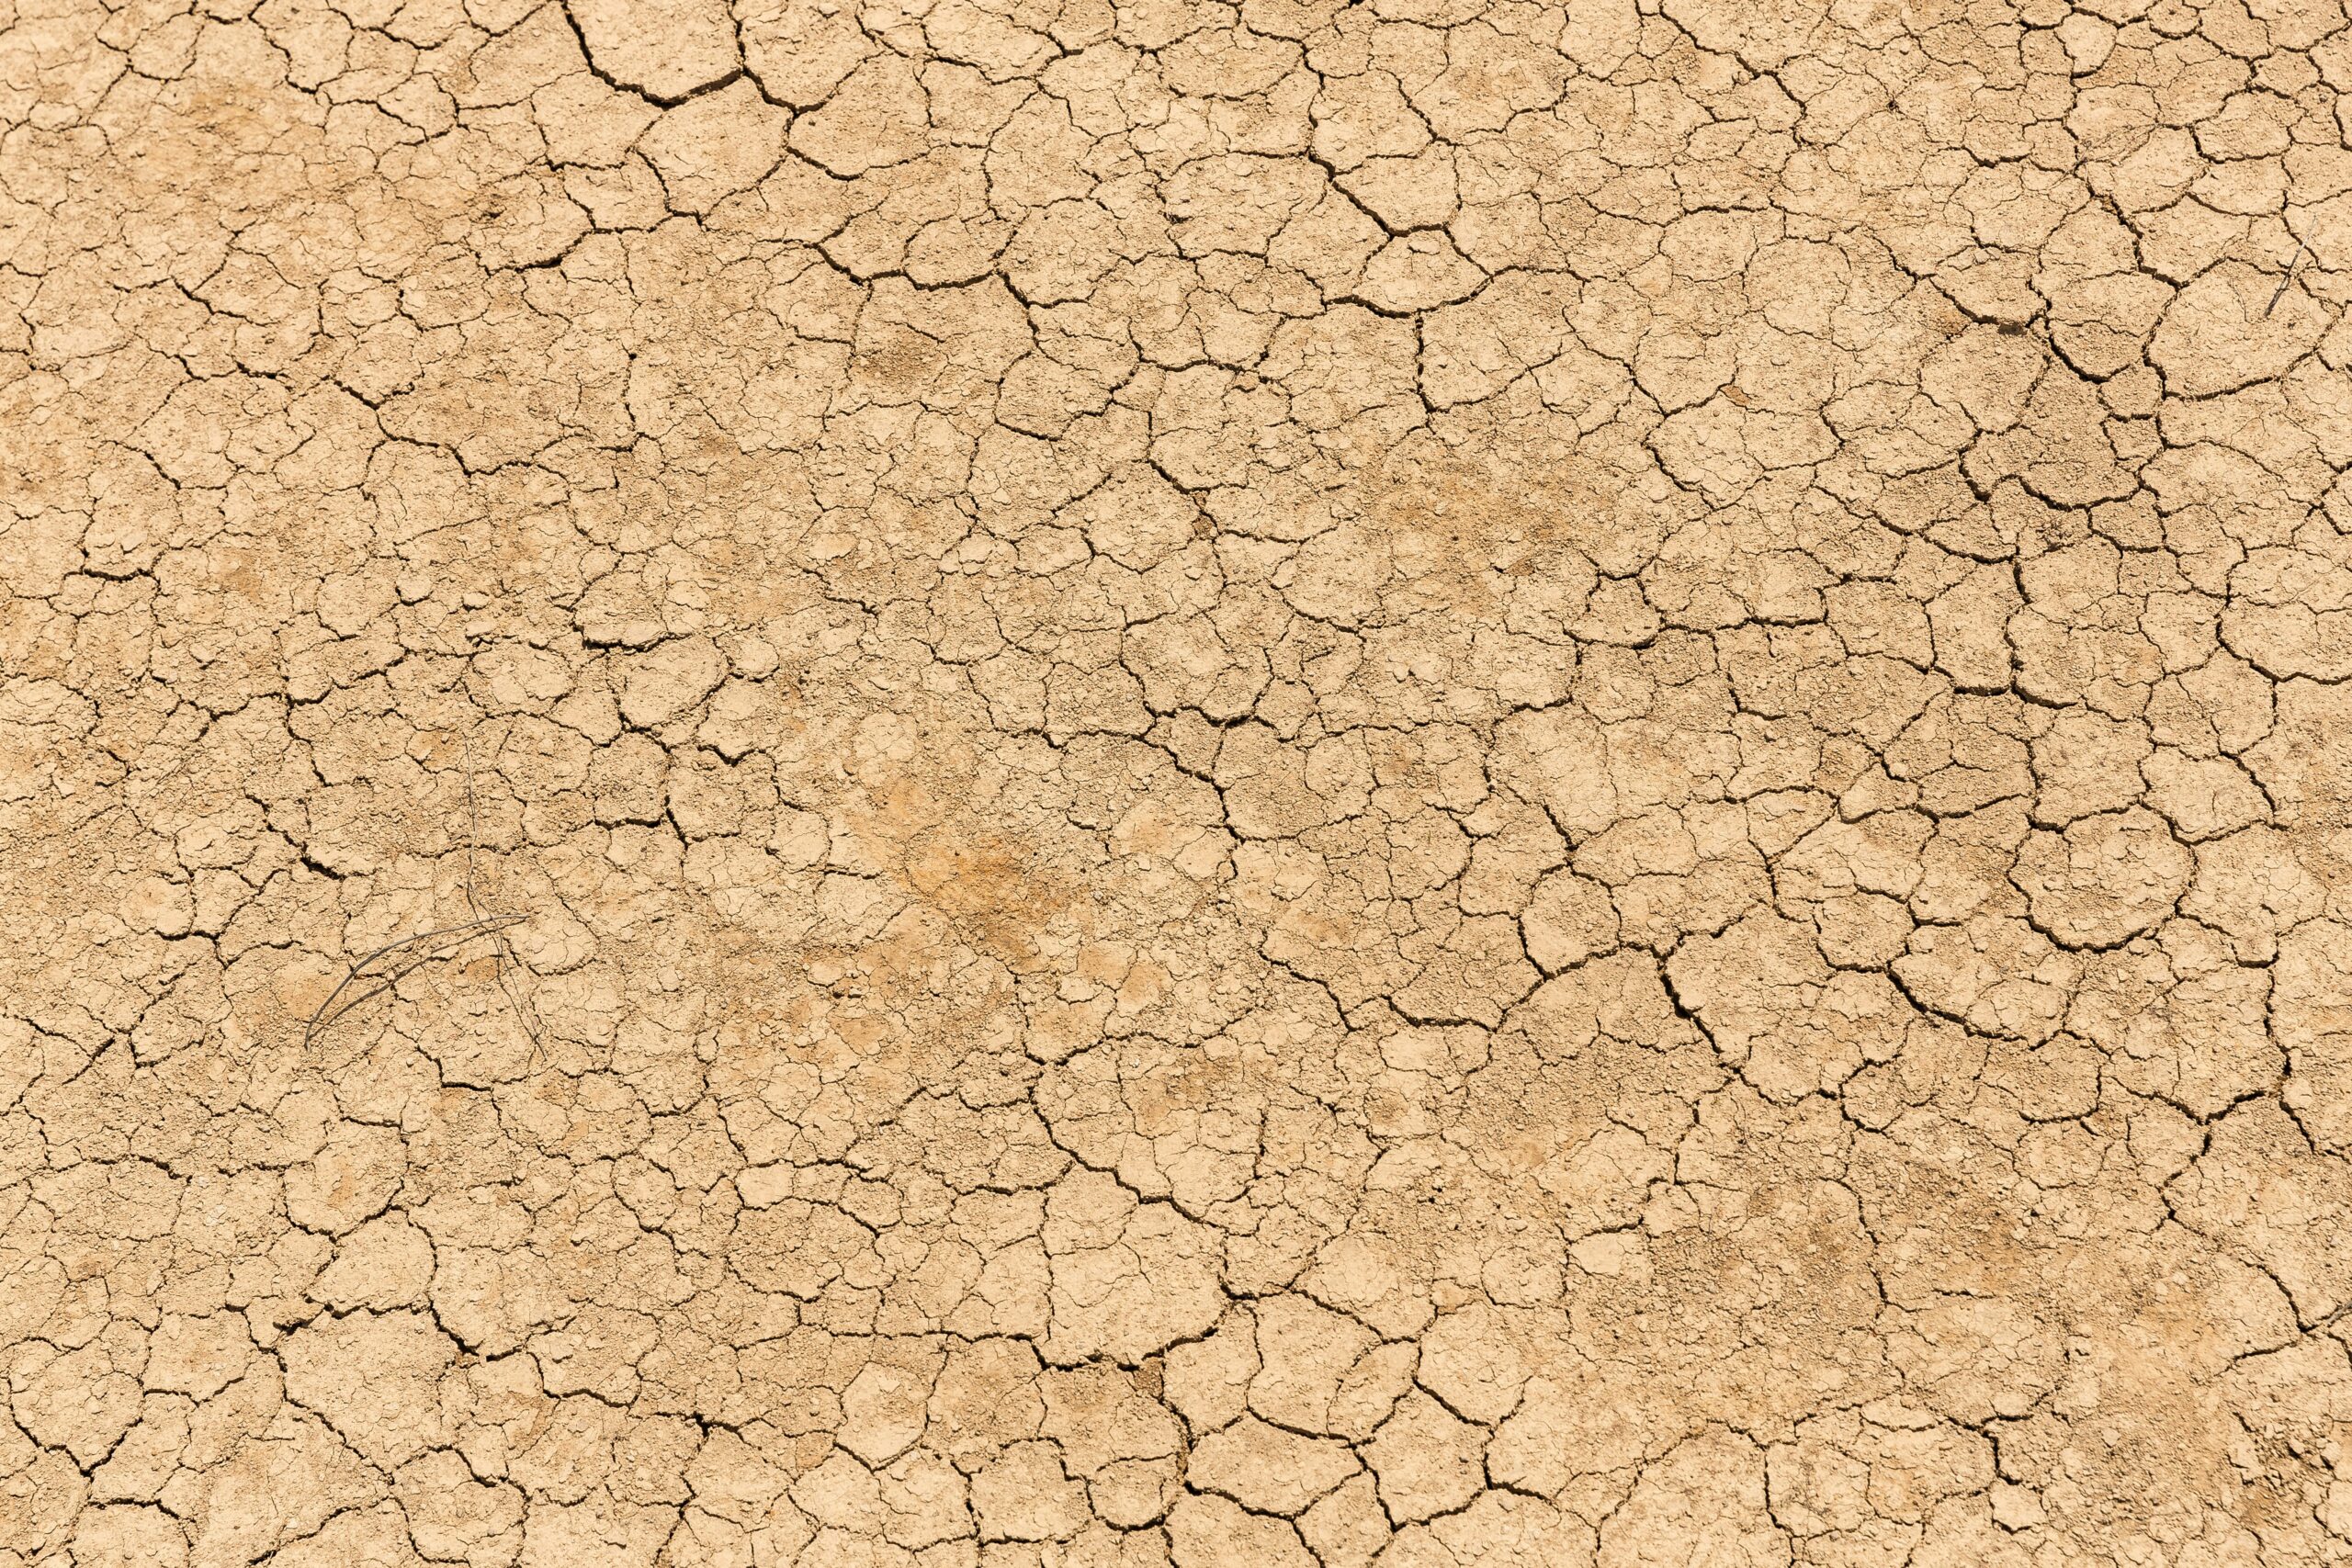 What Should I Do If There Is A Severe Drought Alert?